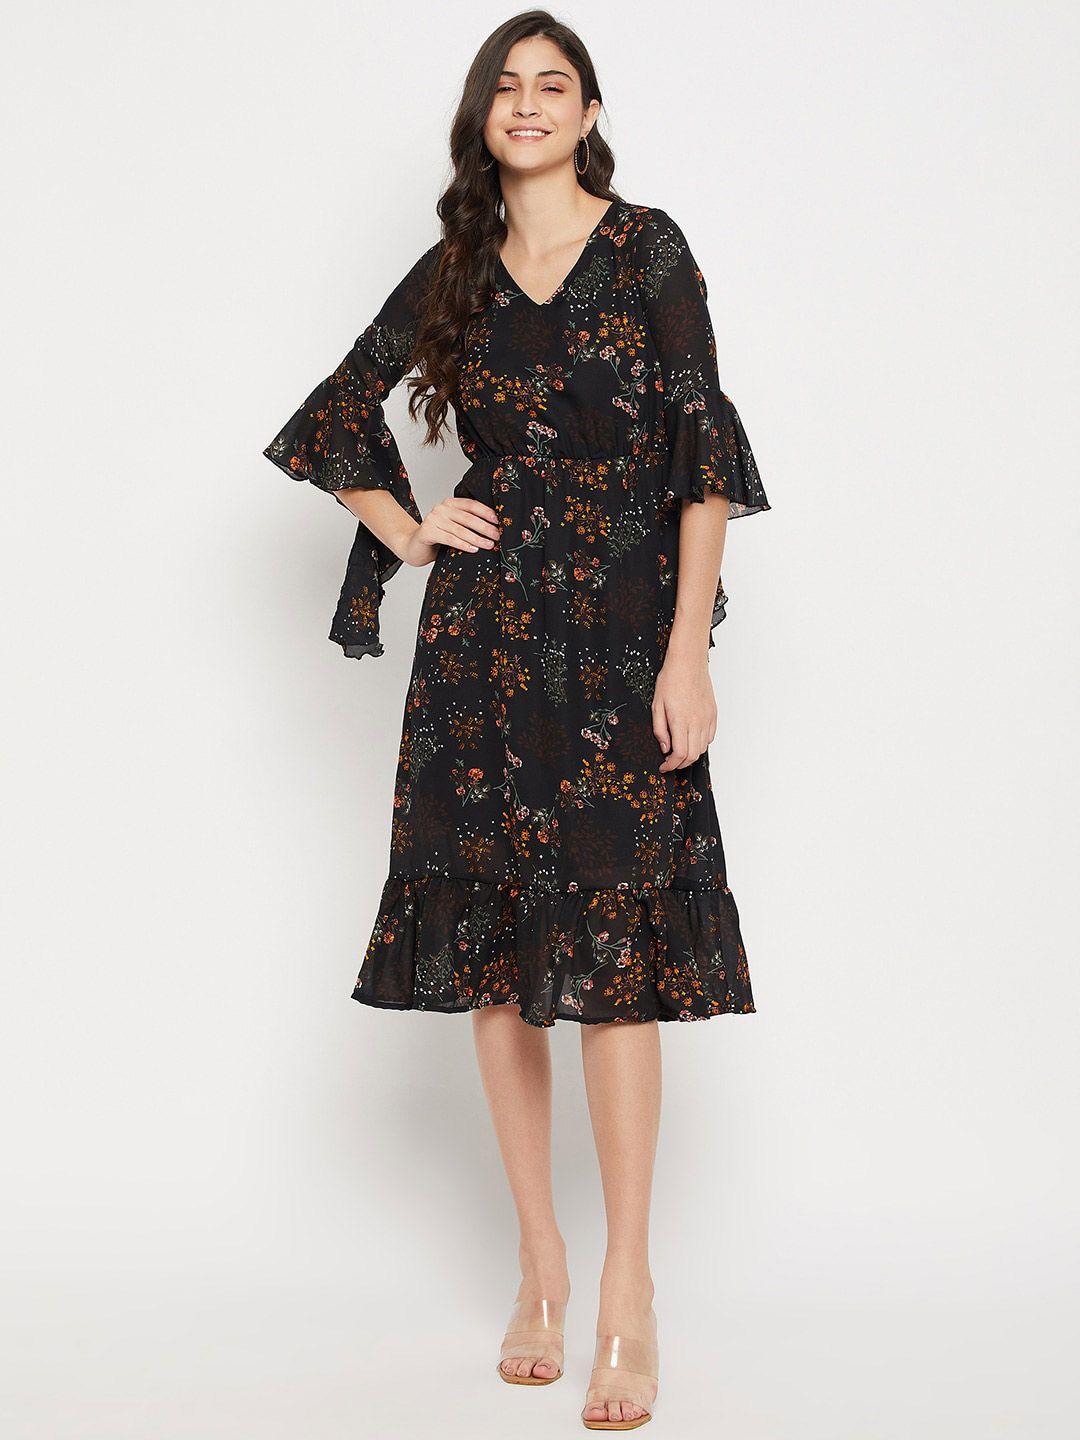 style-blush-floral-print-bell-sleeve-ruffled-georgette-a-line-midi-dress